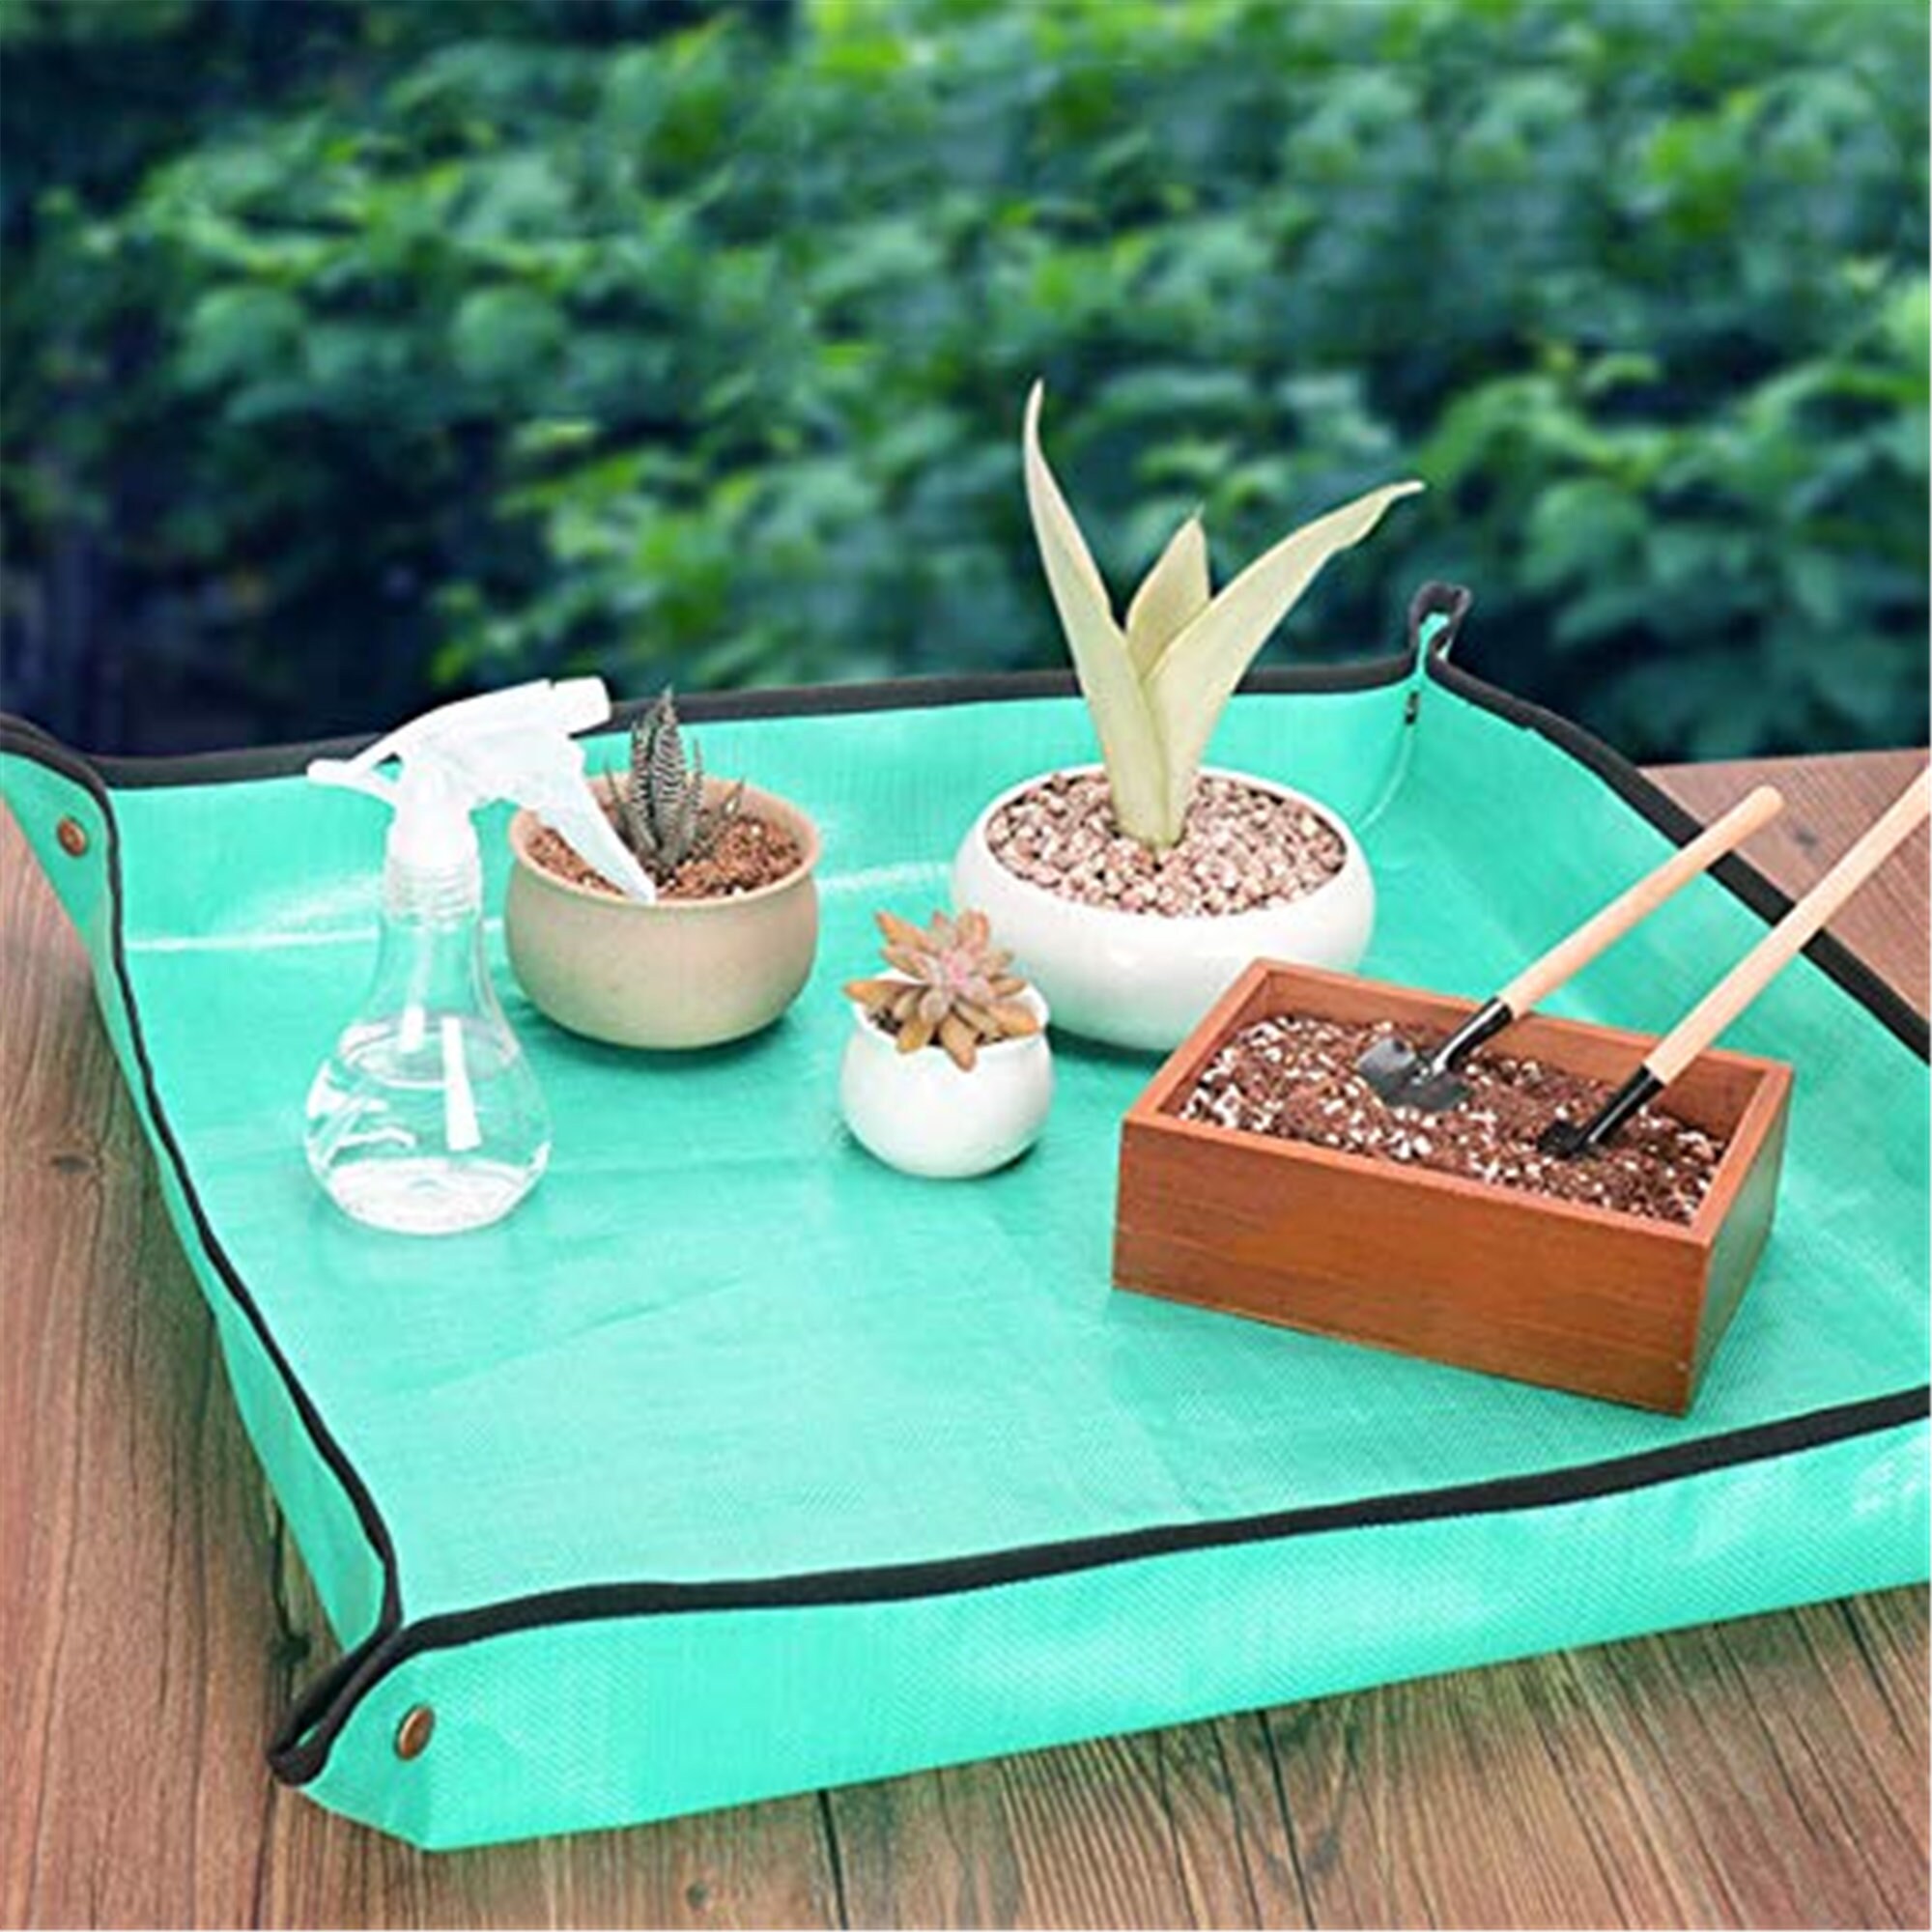 Details about   Ymeibe Plant Repotting Square Mat Waterproof Thicken PE Indoor Transplanting Dir 